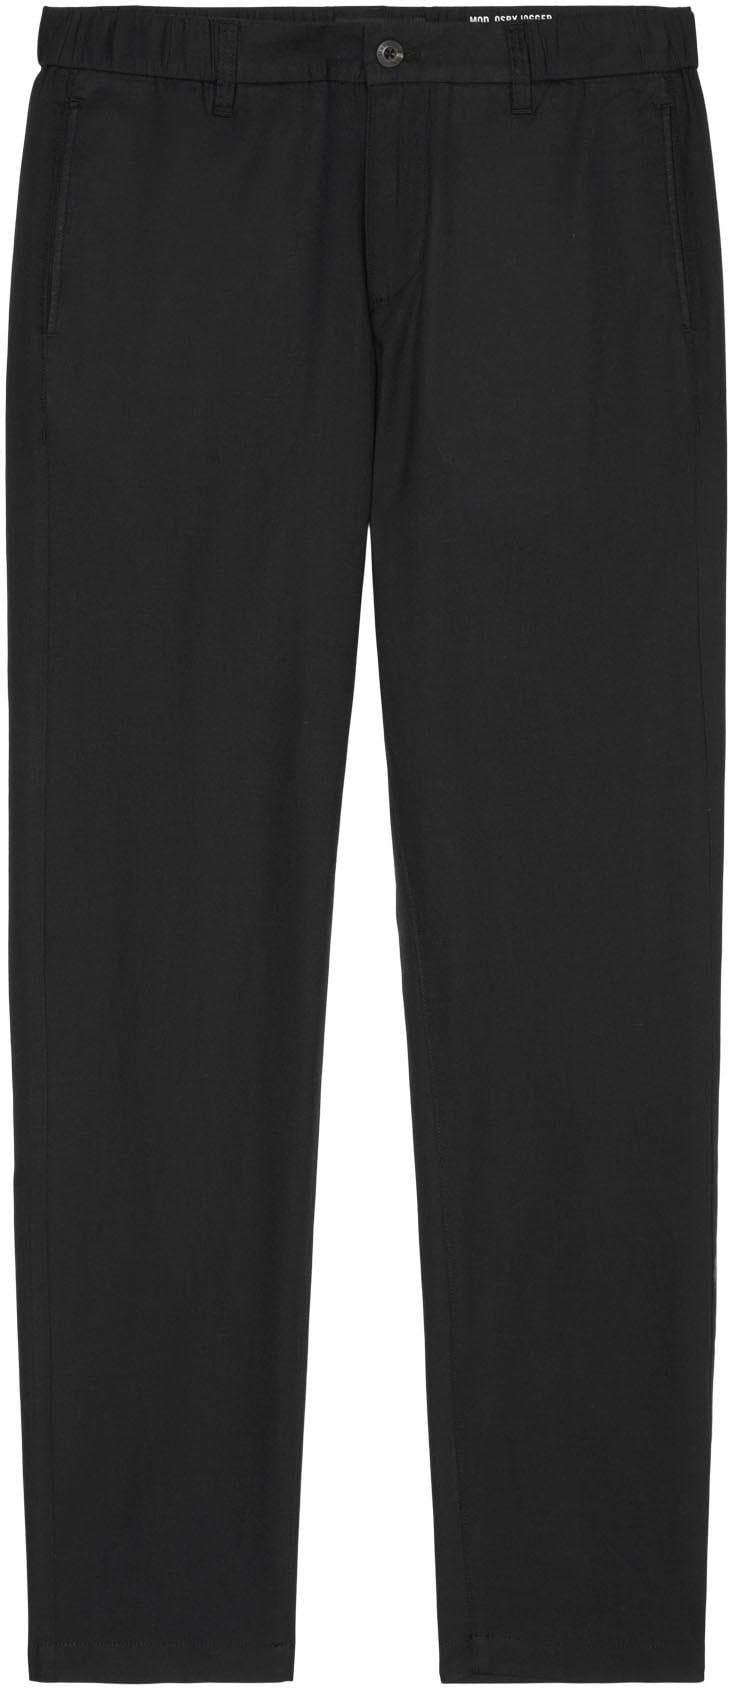 Marc OPolo Jogger Pants "Osby Jogger", mit Markenlabel